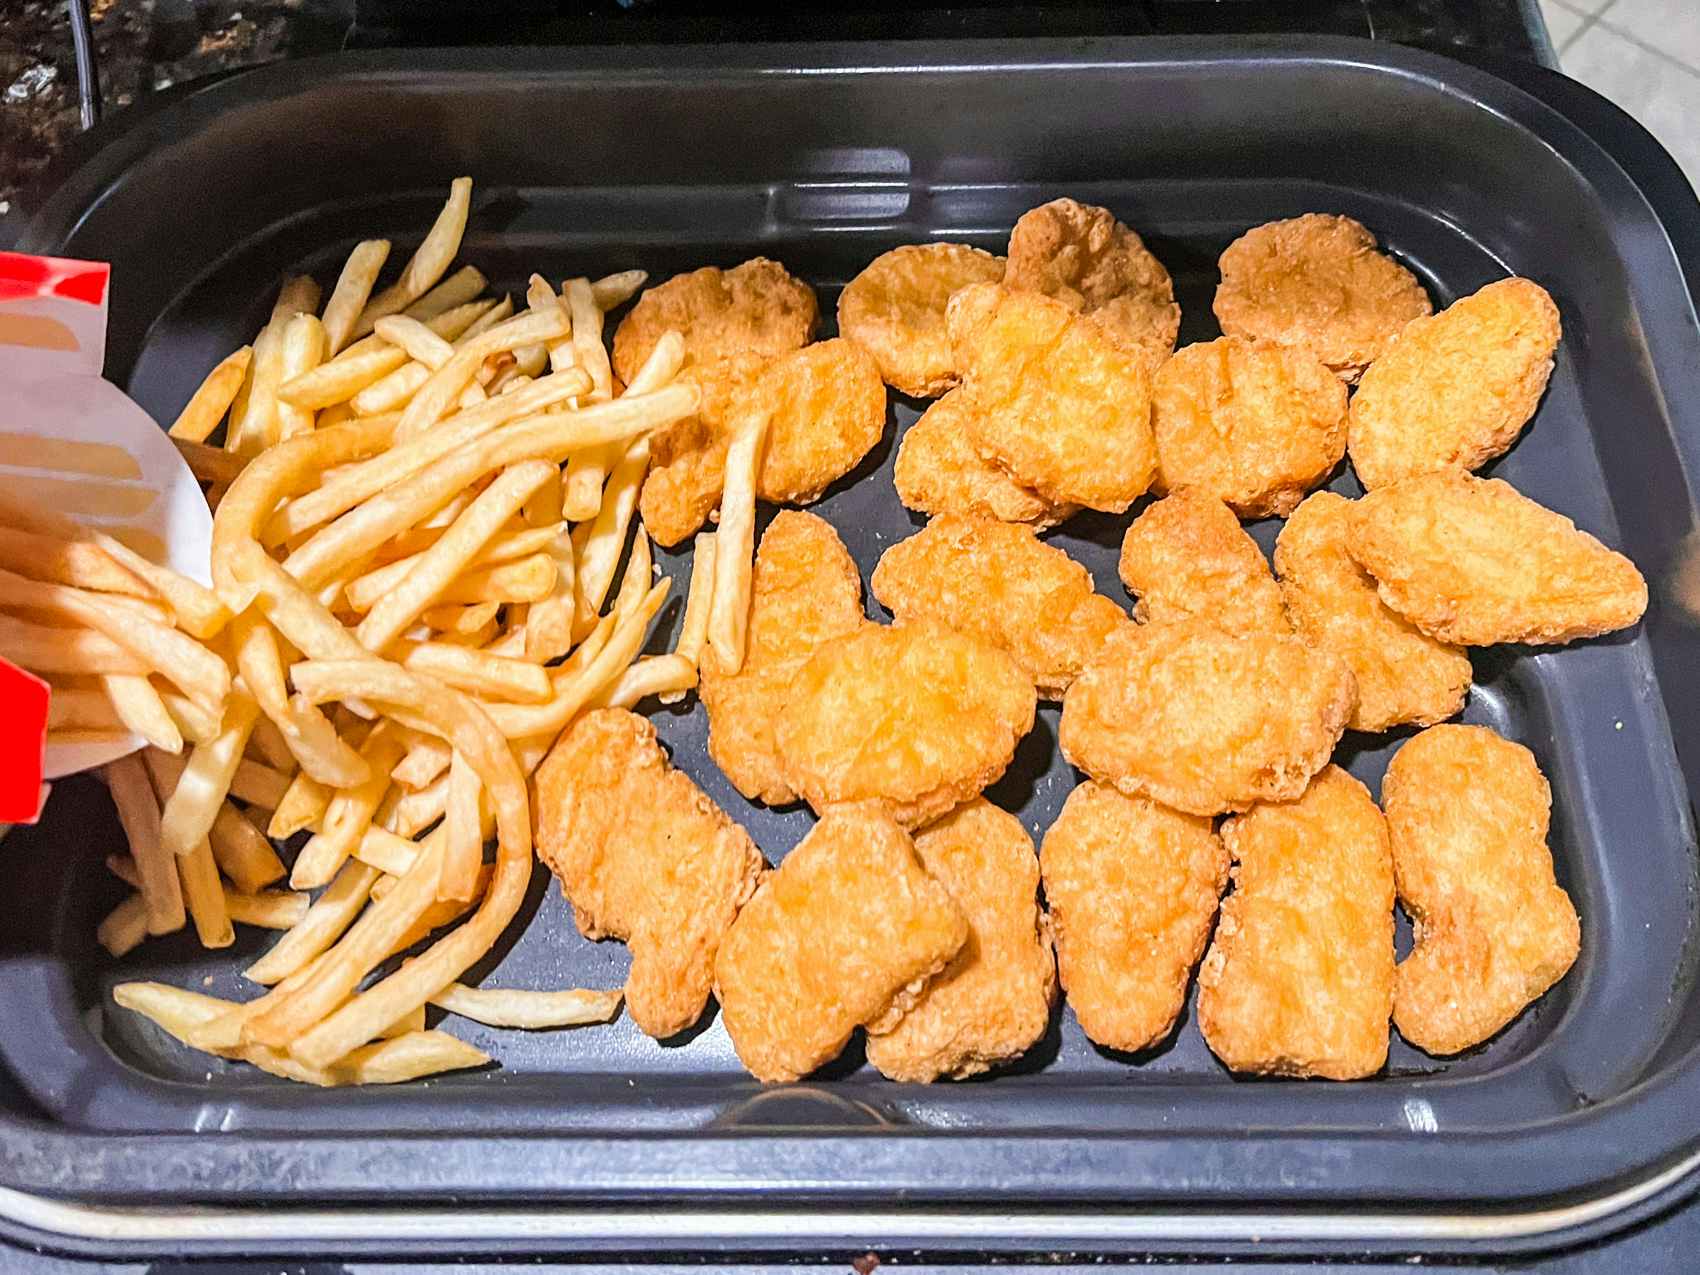 Chicken nuggets and fries inside an air fryer